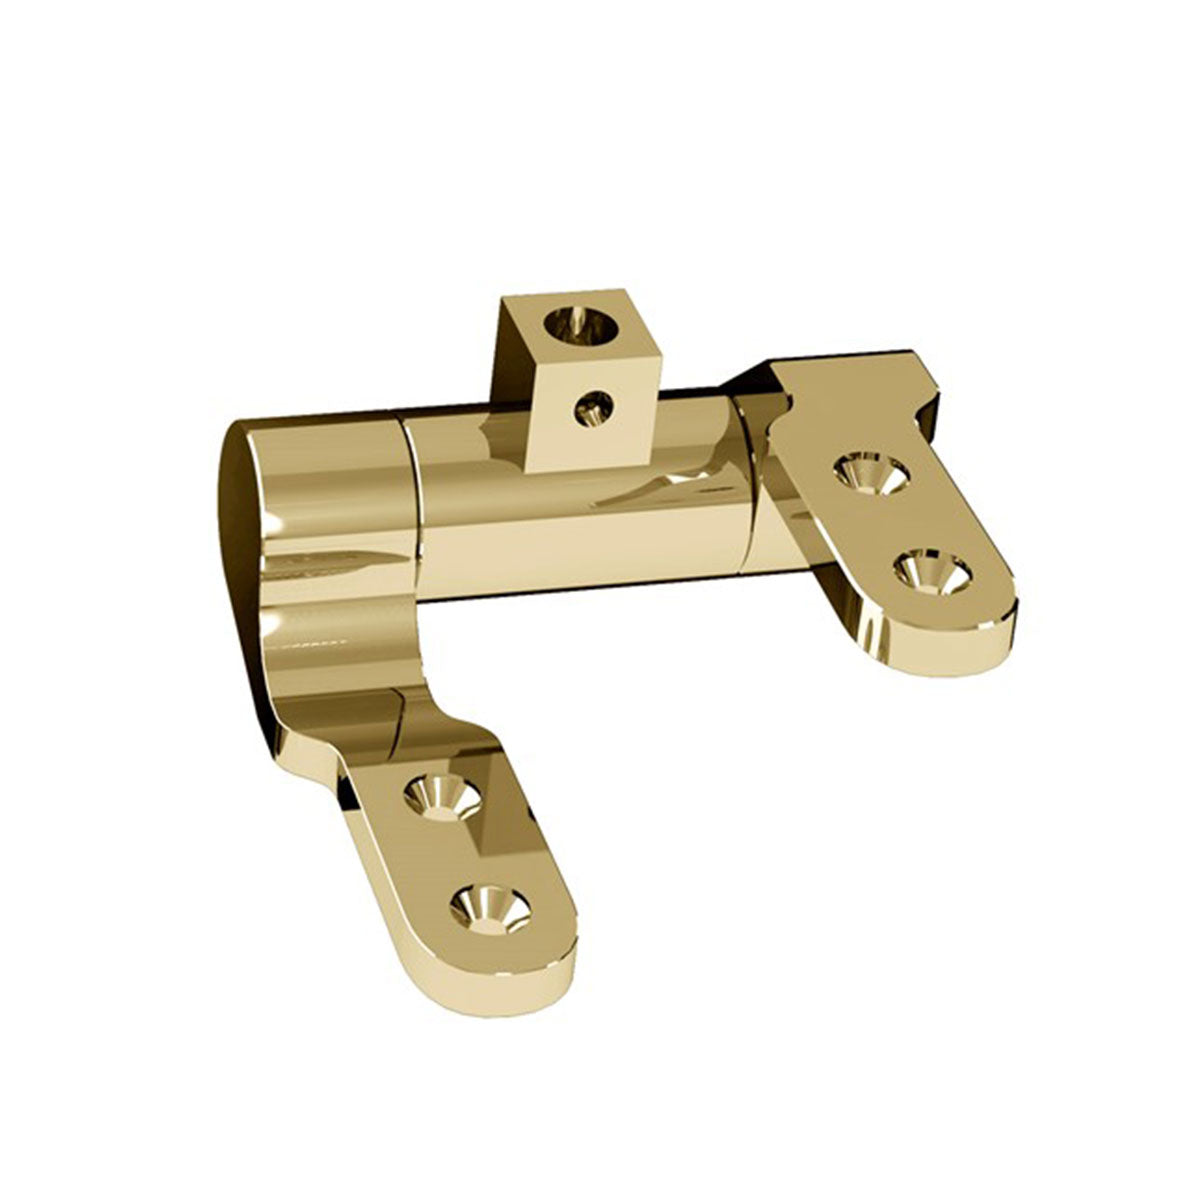 A Set of 2 Gold Soft Close Hinges For Riviera WC Seat Deluxe Bathrooms UK